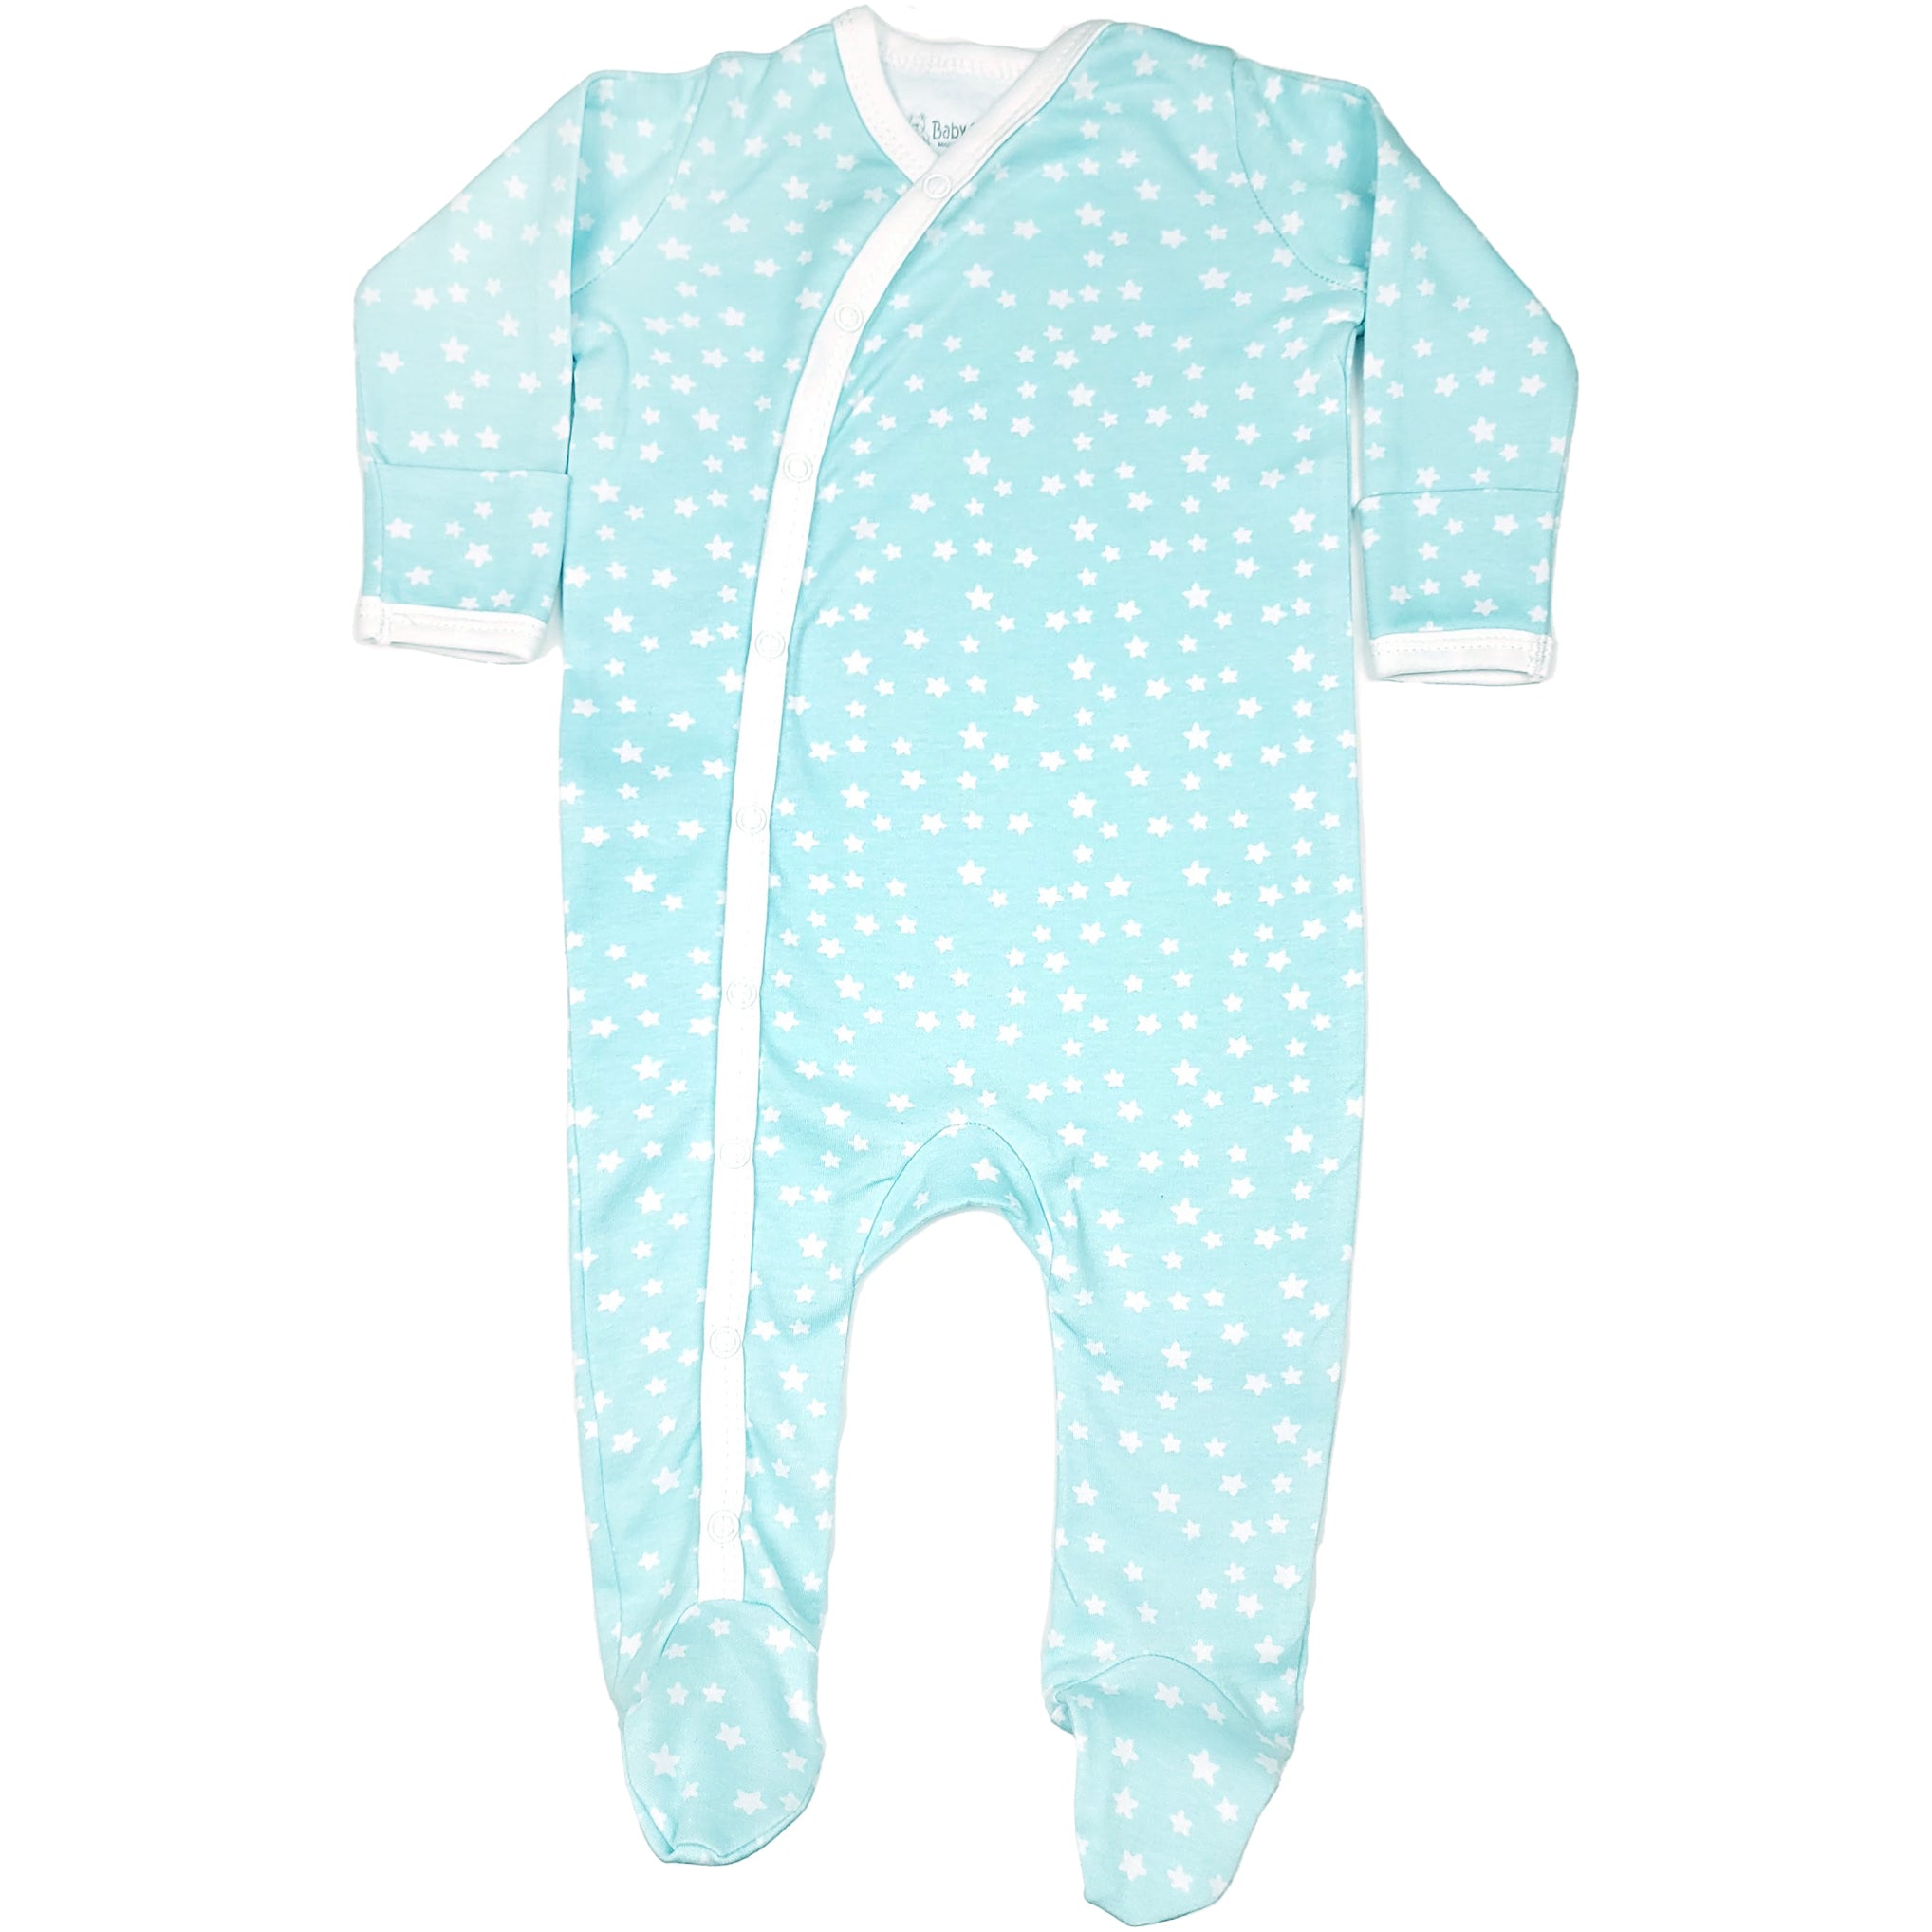 123 Bear Footed Sleep-N-Play PJs Rompers Jumpsuit100% Cotton with Mitten Cuffs Unisex Boys Girls